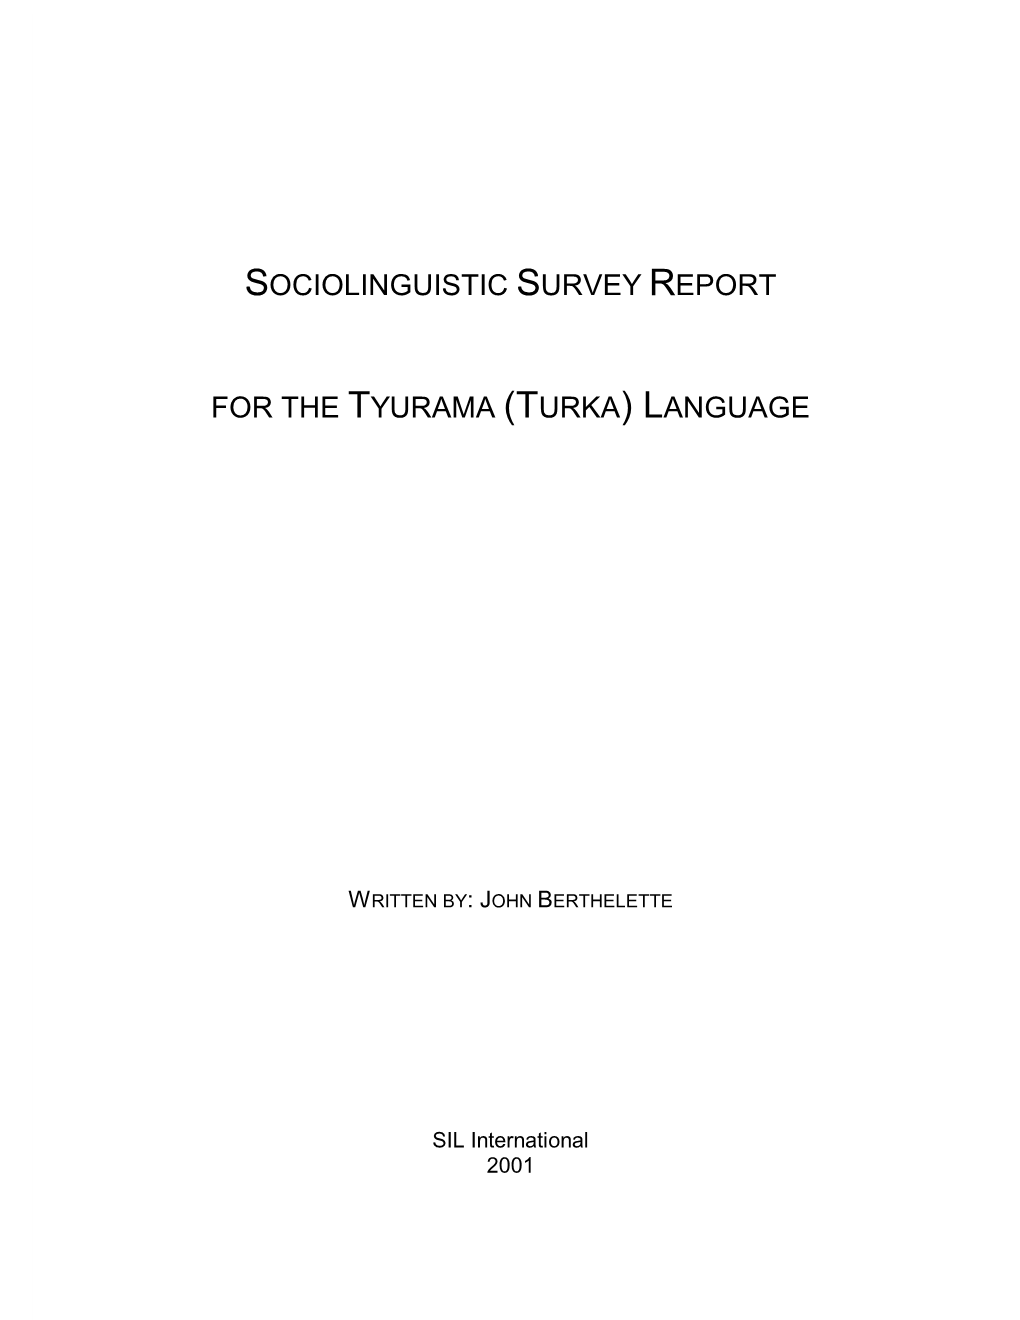 Sociolinguistic Survey Report for The